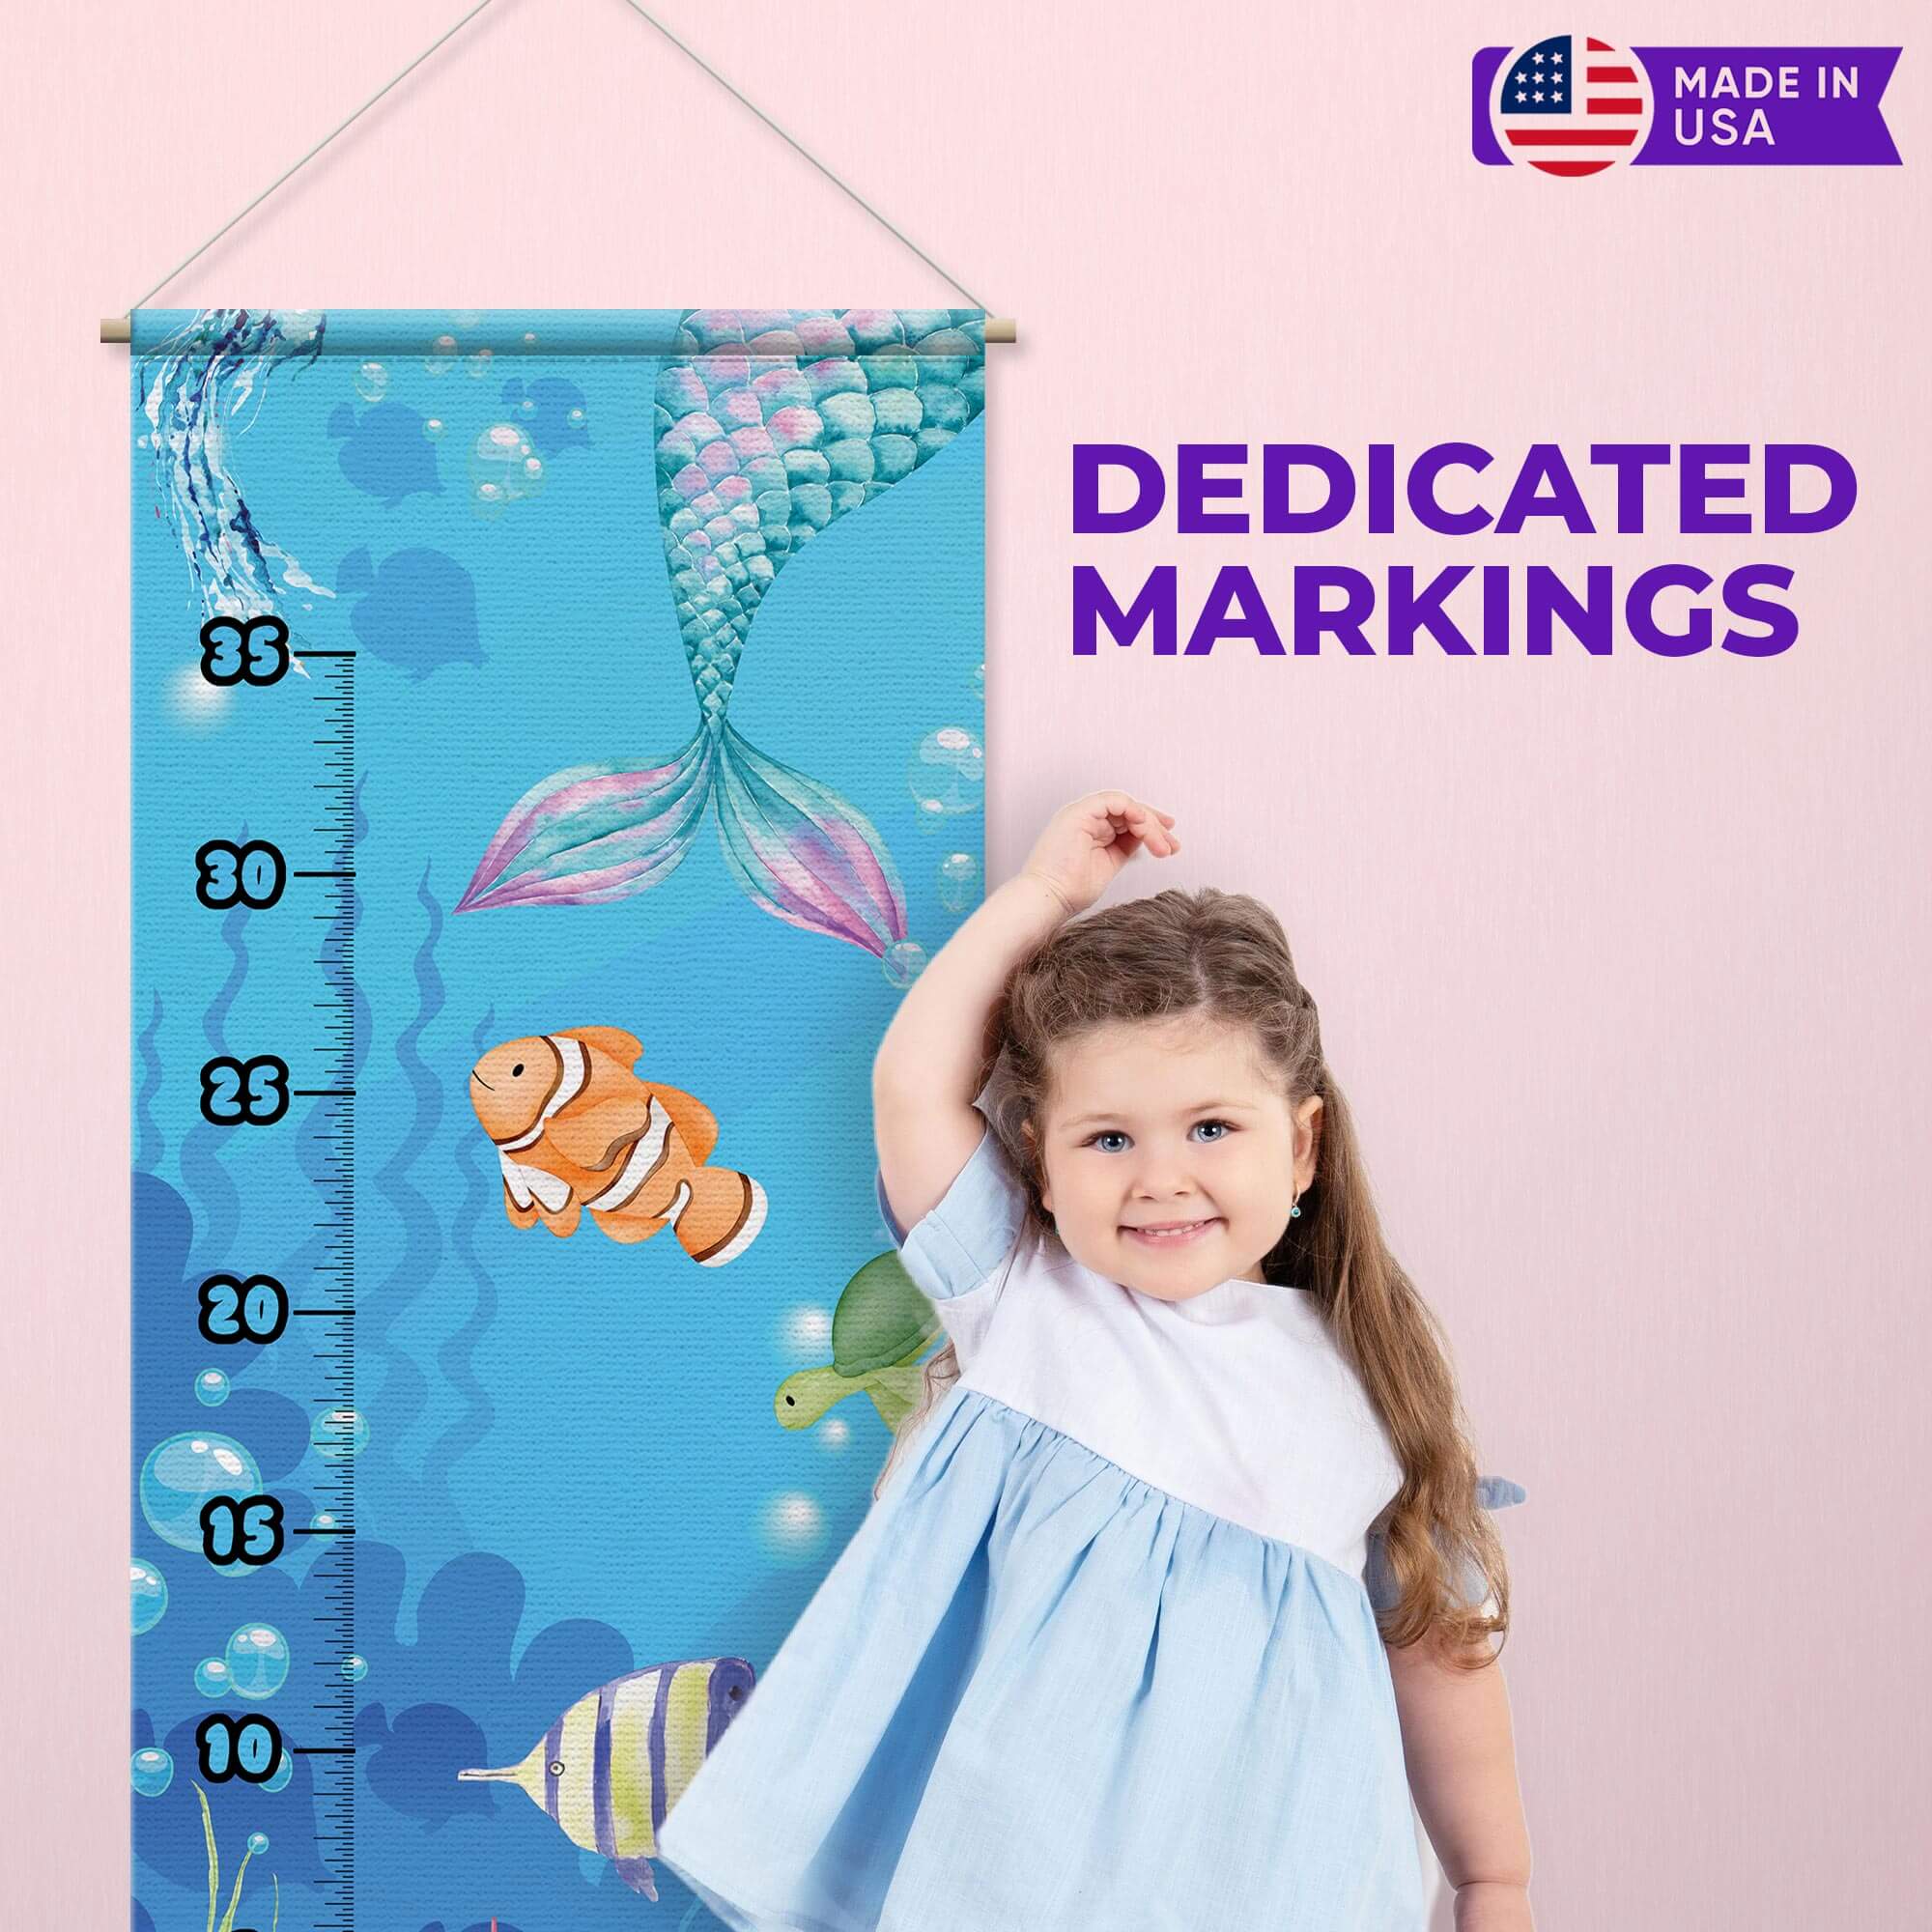 Dream Controller Under the sea Toddler Growth Chart